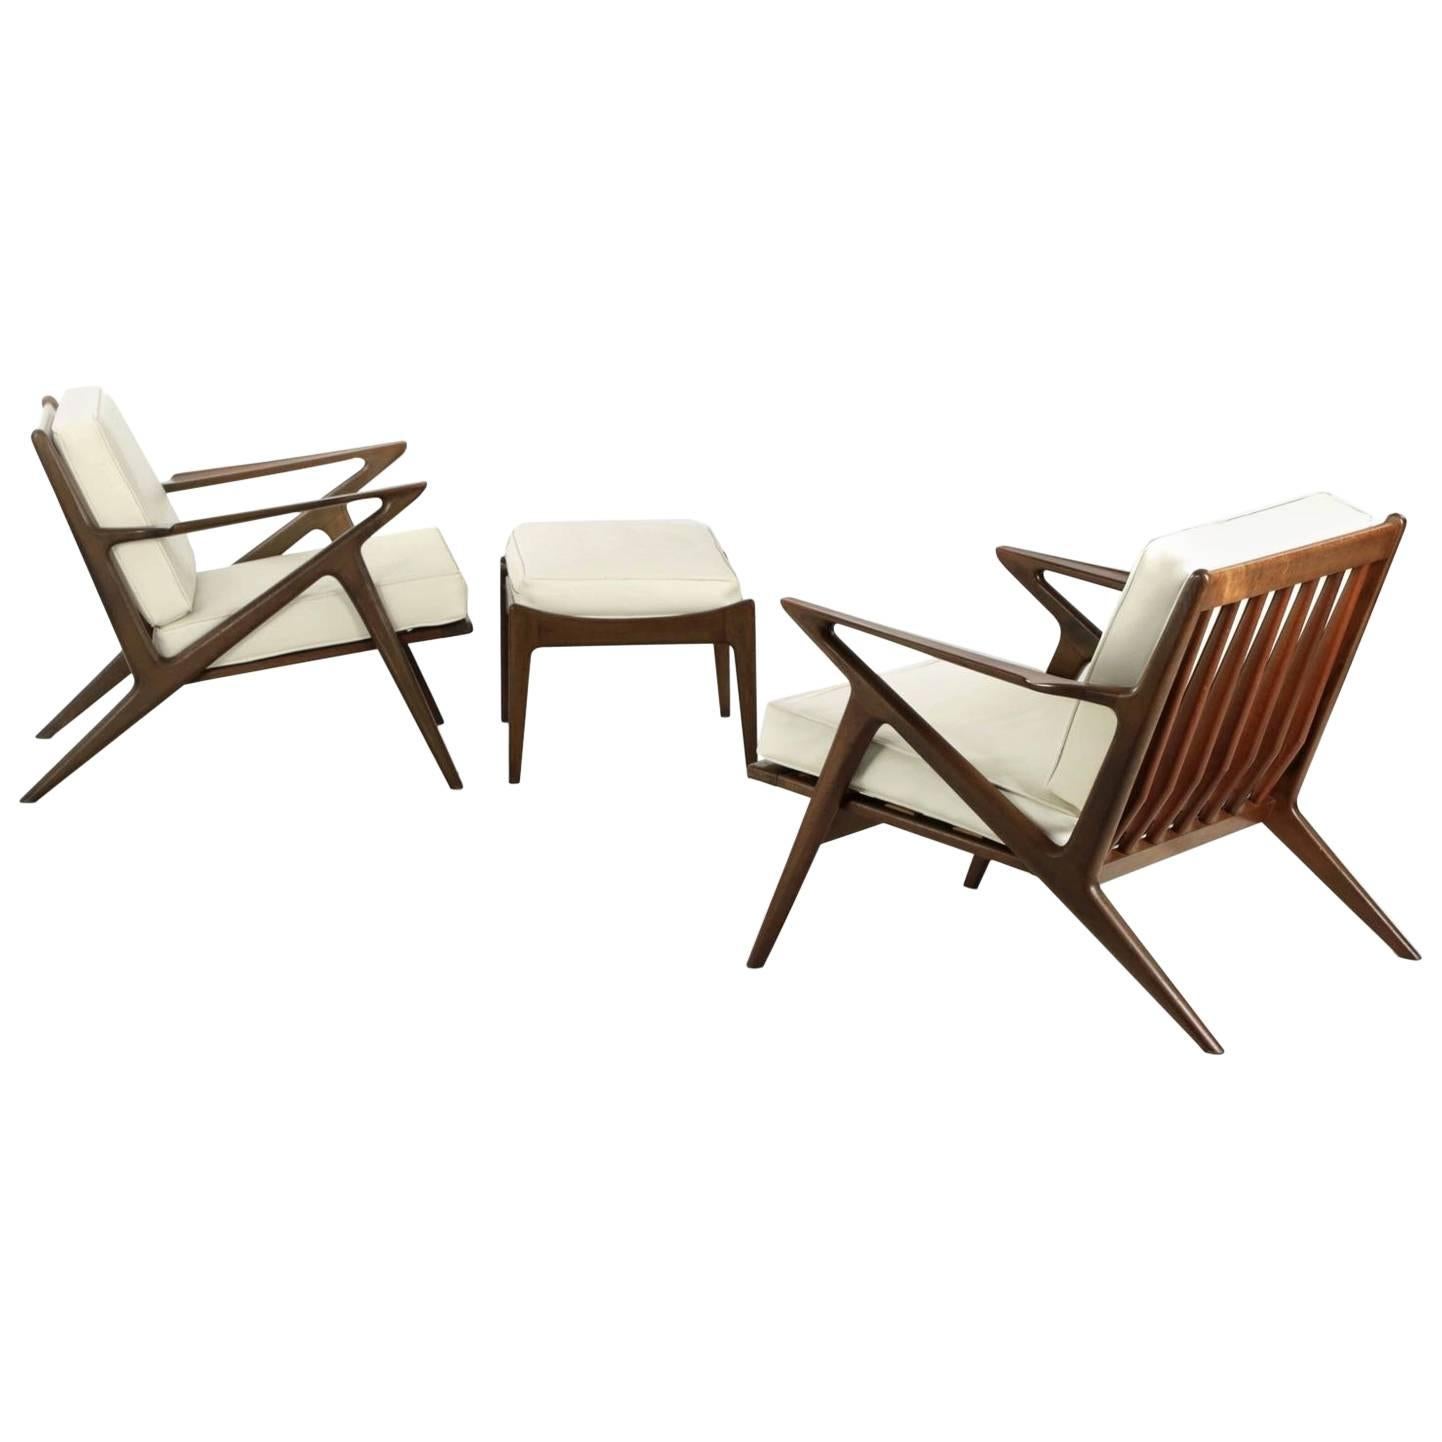 Pair of Sculpted Teak Poul Jensen for Selig "Z" Lounge Chairs with Ottoman